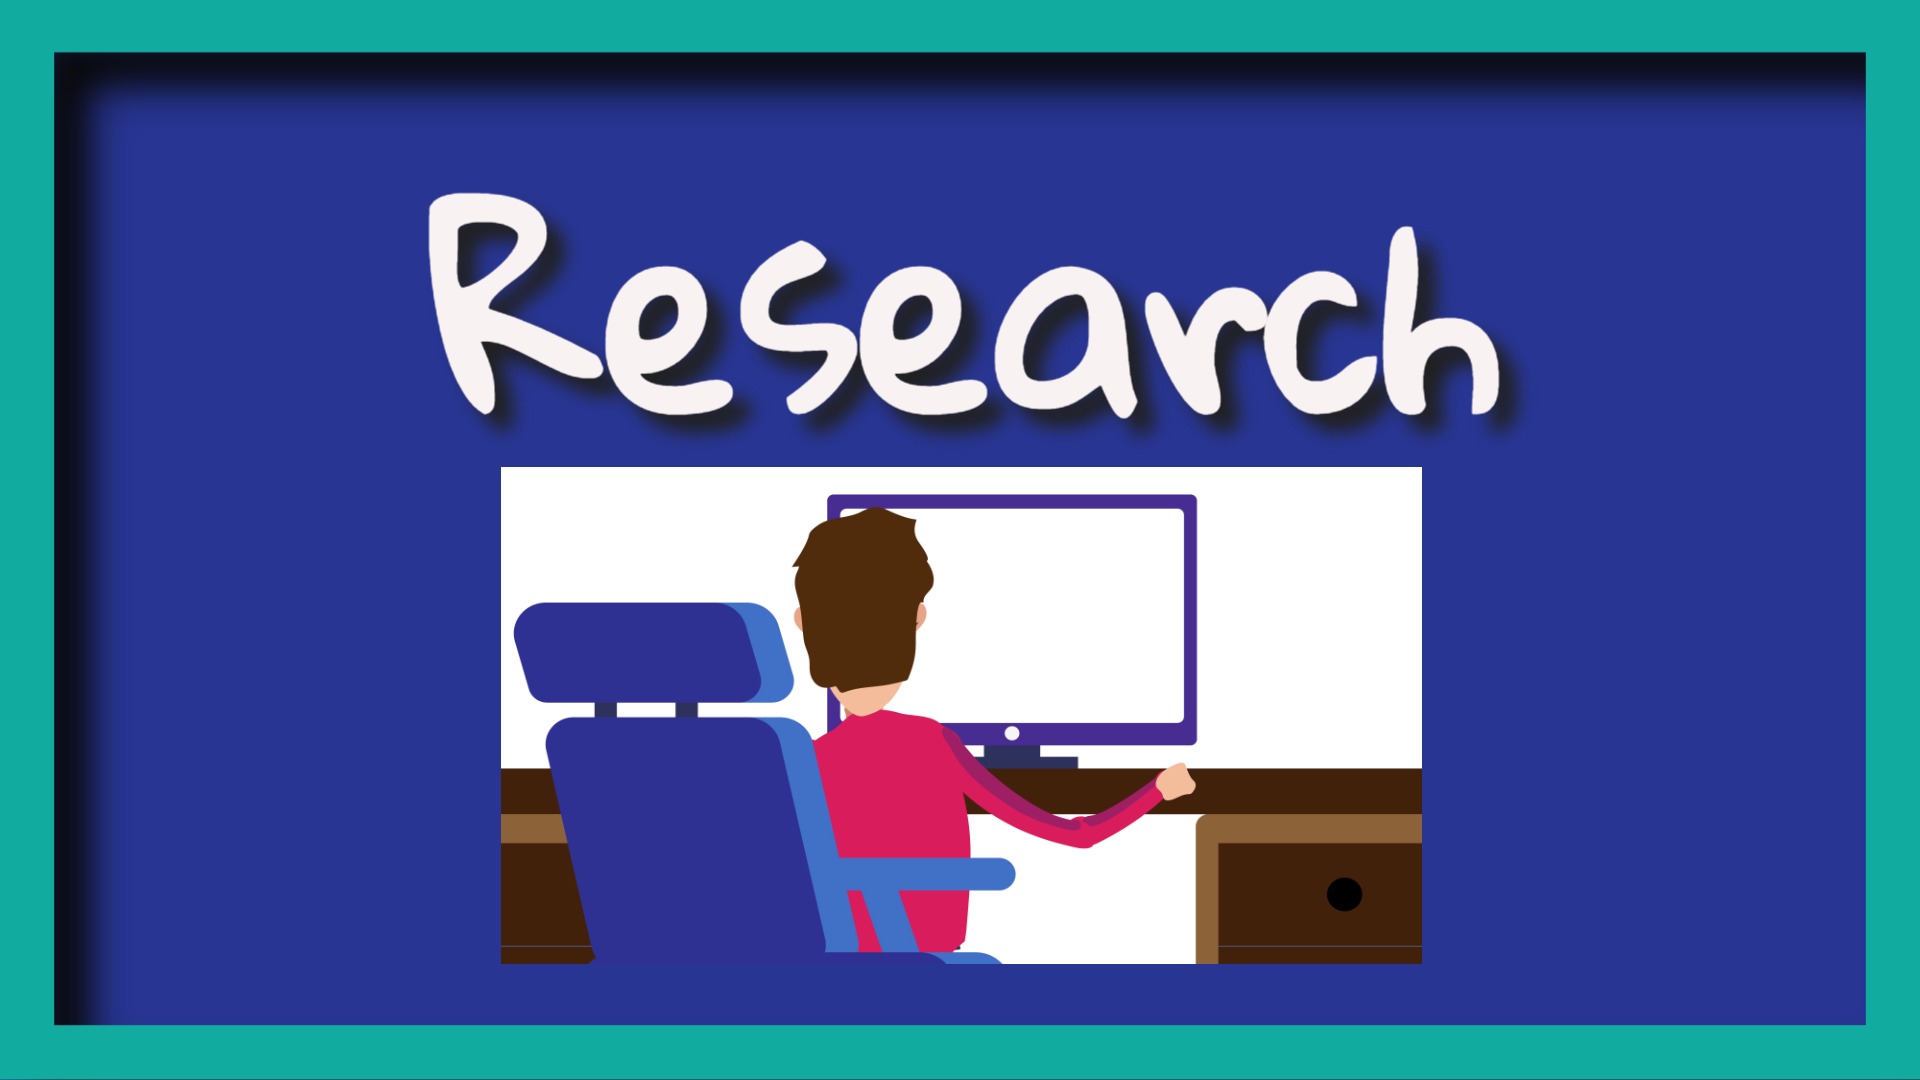 animated person at computer doing research